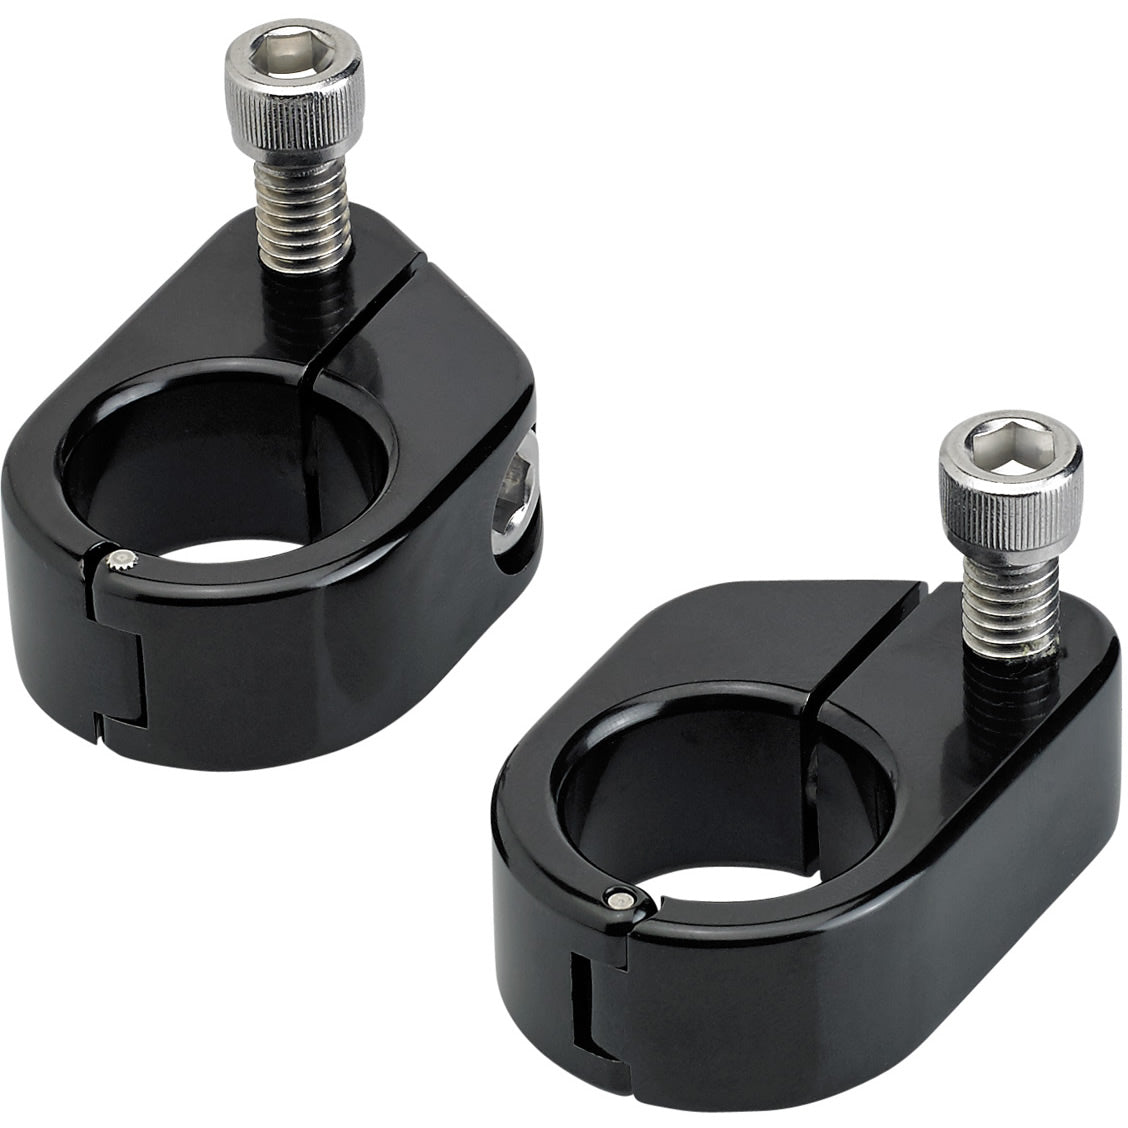 CLOSEOUT Speed Clamps - Black